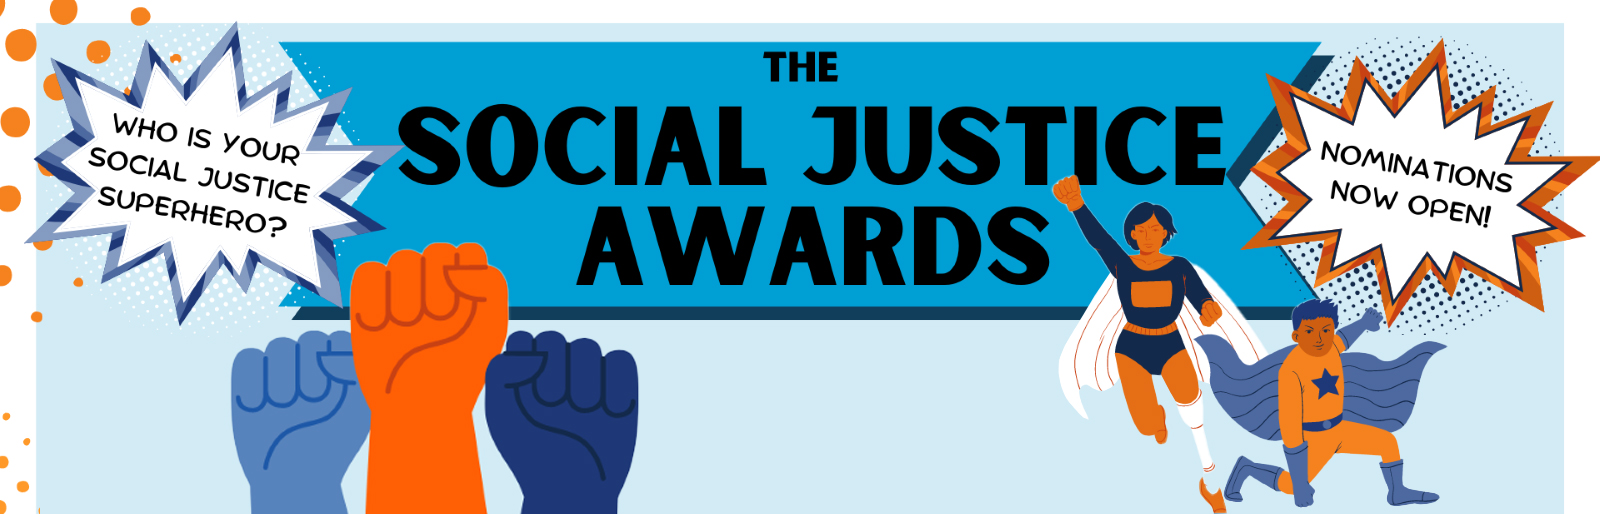 The Social Justice Awards header with orange and blue comic style illustrations of superheroes and fists